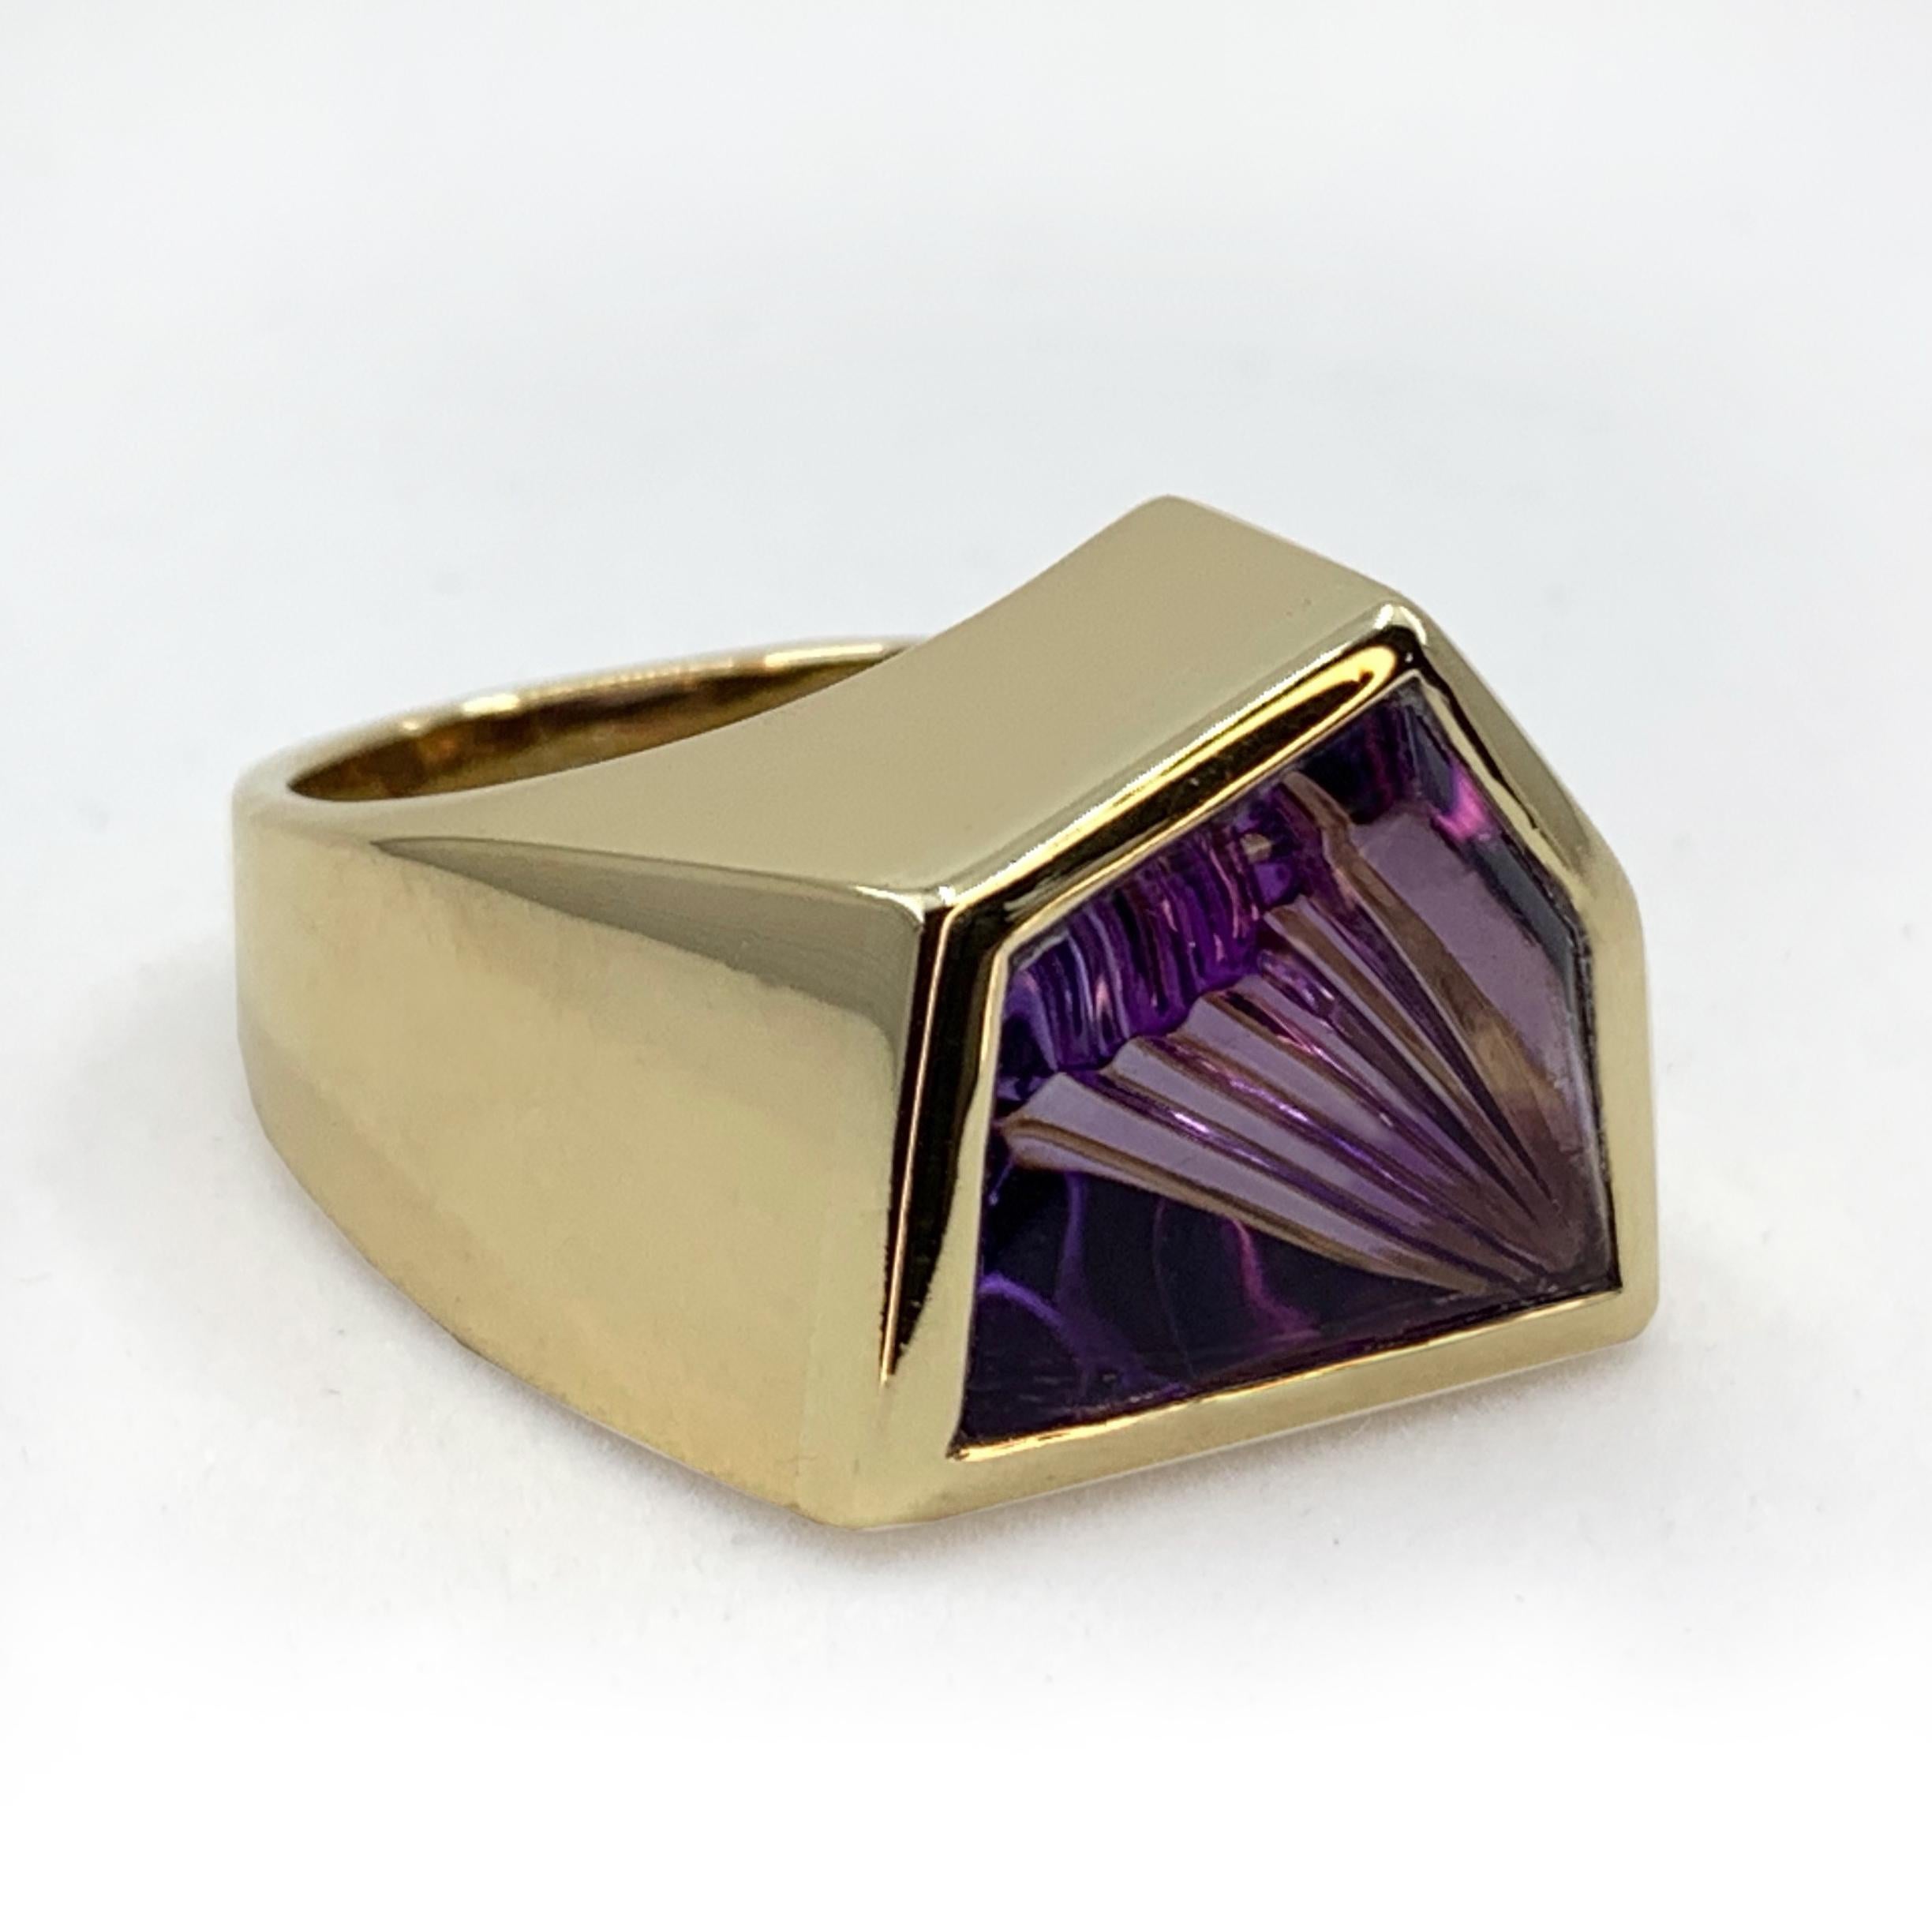 Incorporating her love of both amethysts and bold shapes, this ring, designed by Paloma Picasso early in her 30-year creative alliance with Tiffany & Co., is also a masterful example of the gem cutter's art:  shaped like a child's drawing of a